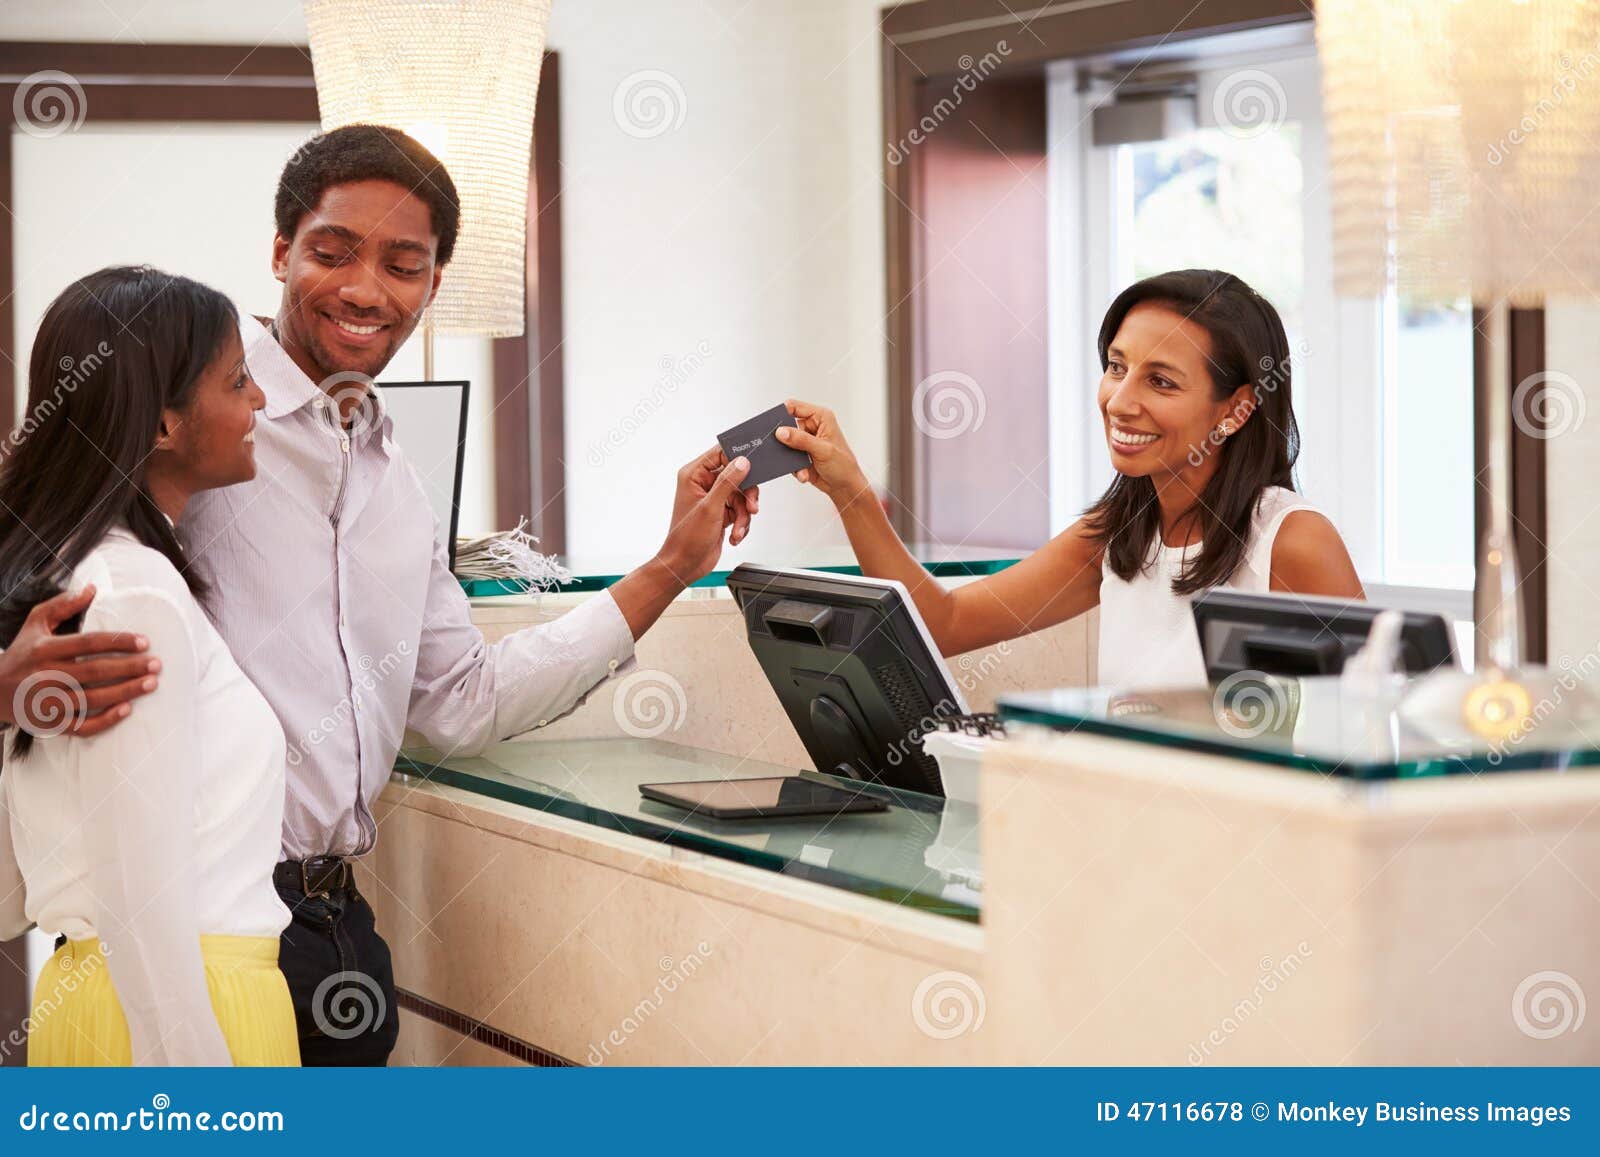 Couple Checking In At Hotel Reception Stock Photo Image Of Female